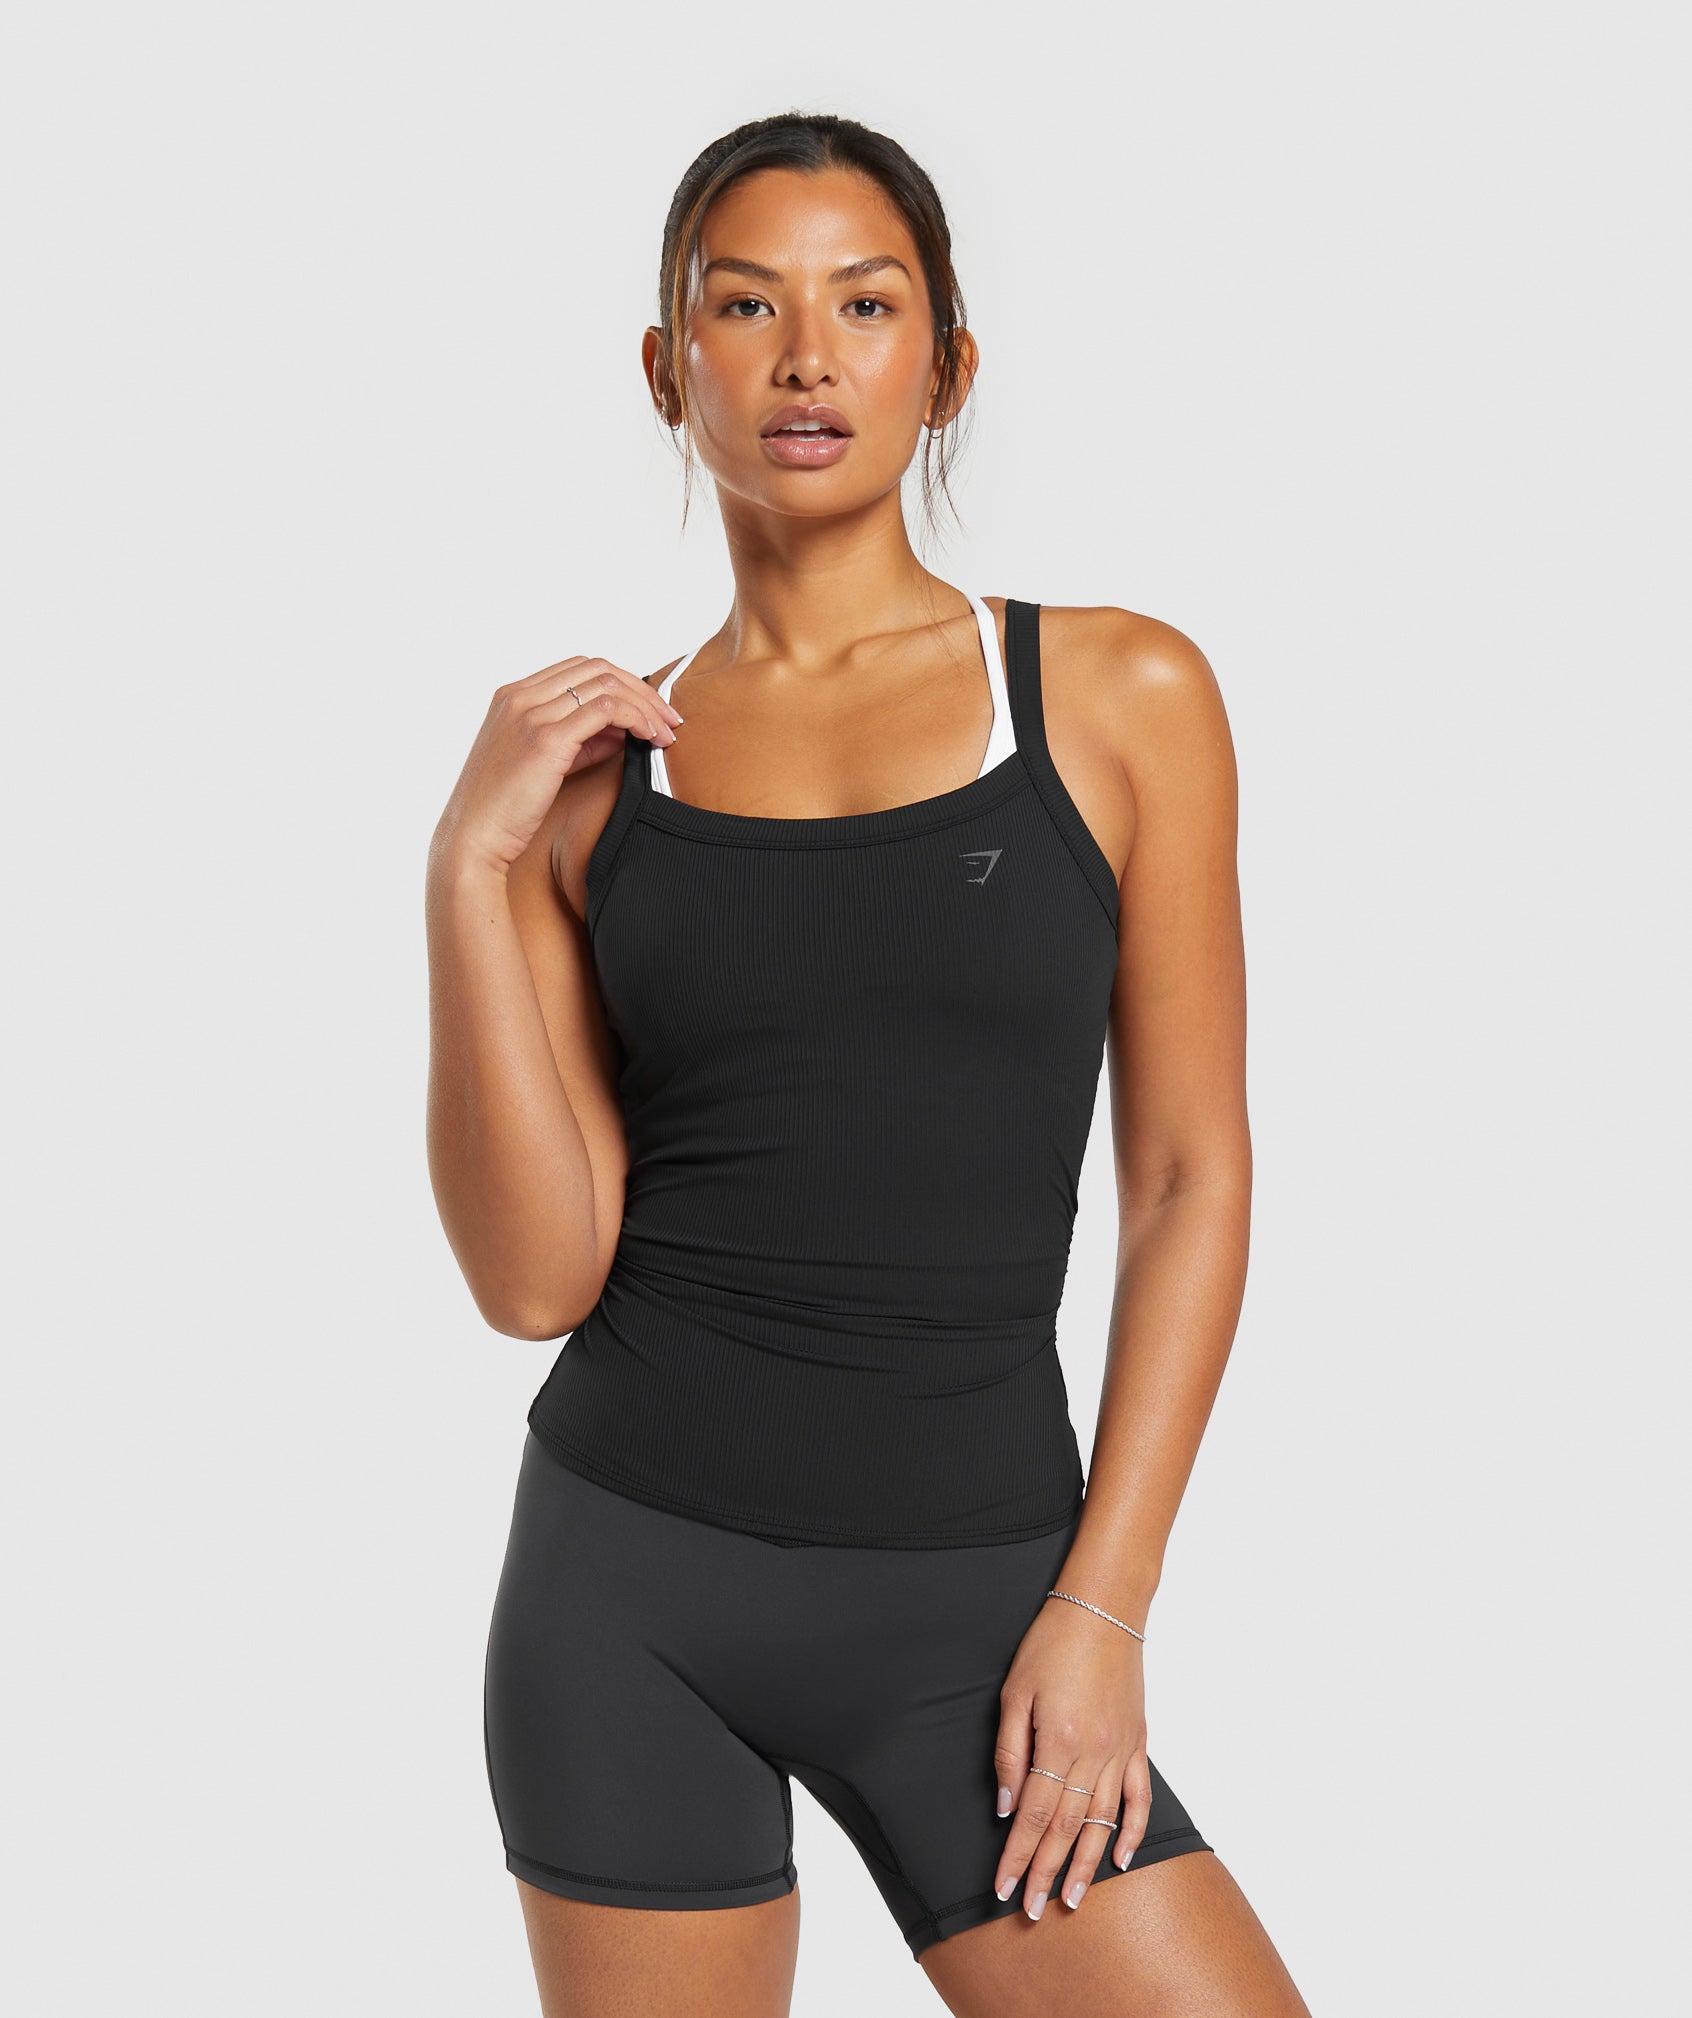 HeyNuts Workout Tank Blue - $16 (46% Off Retail) - From Blair